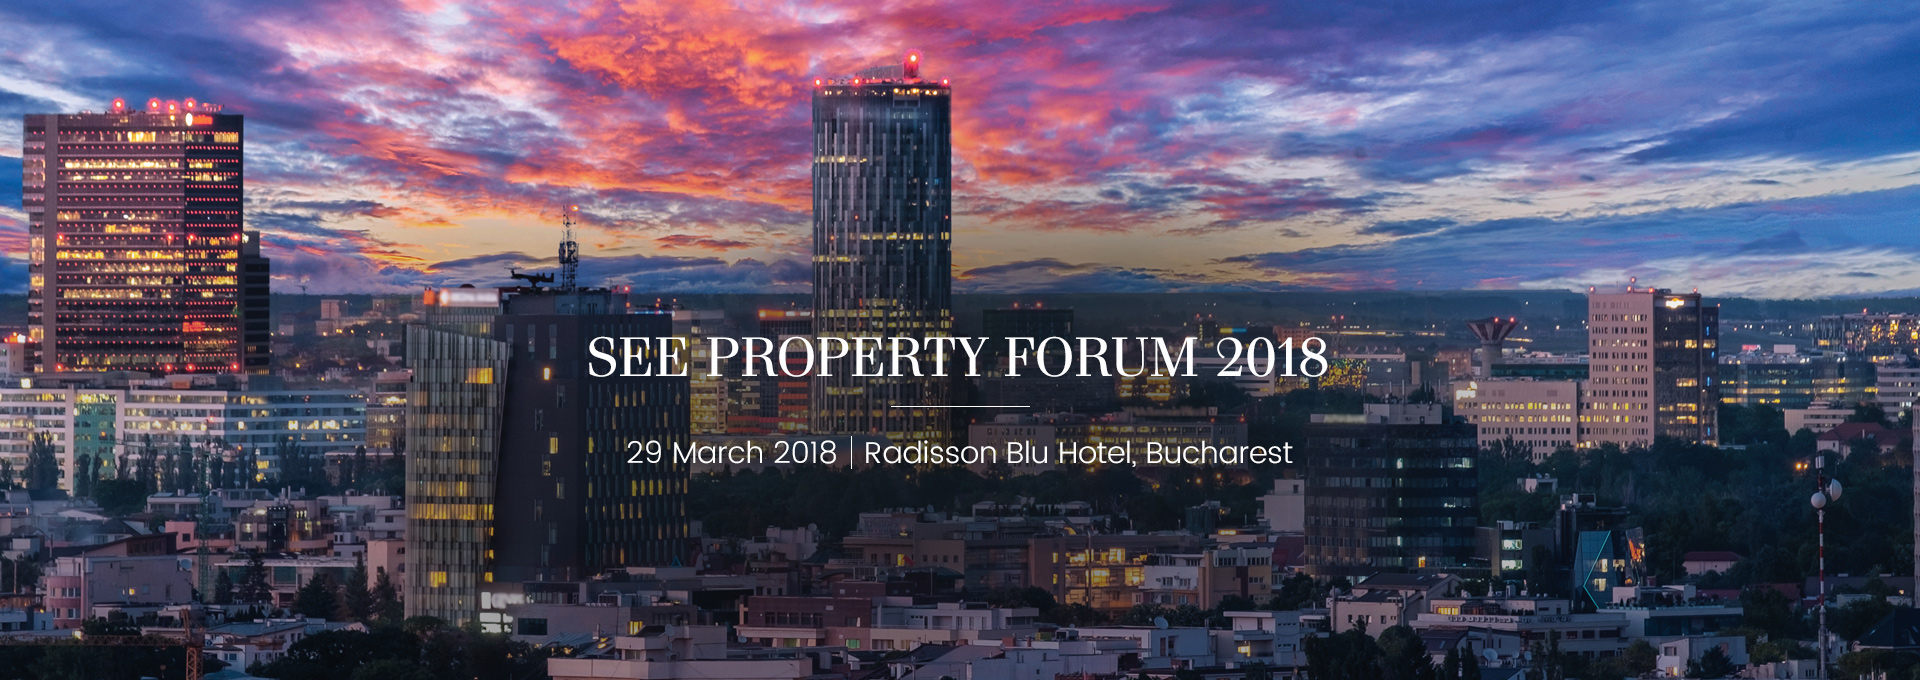 SEE Property Forum